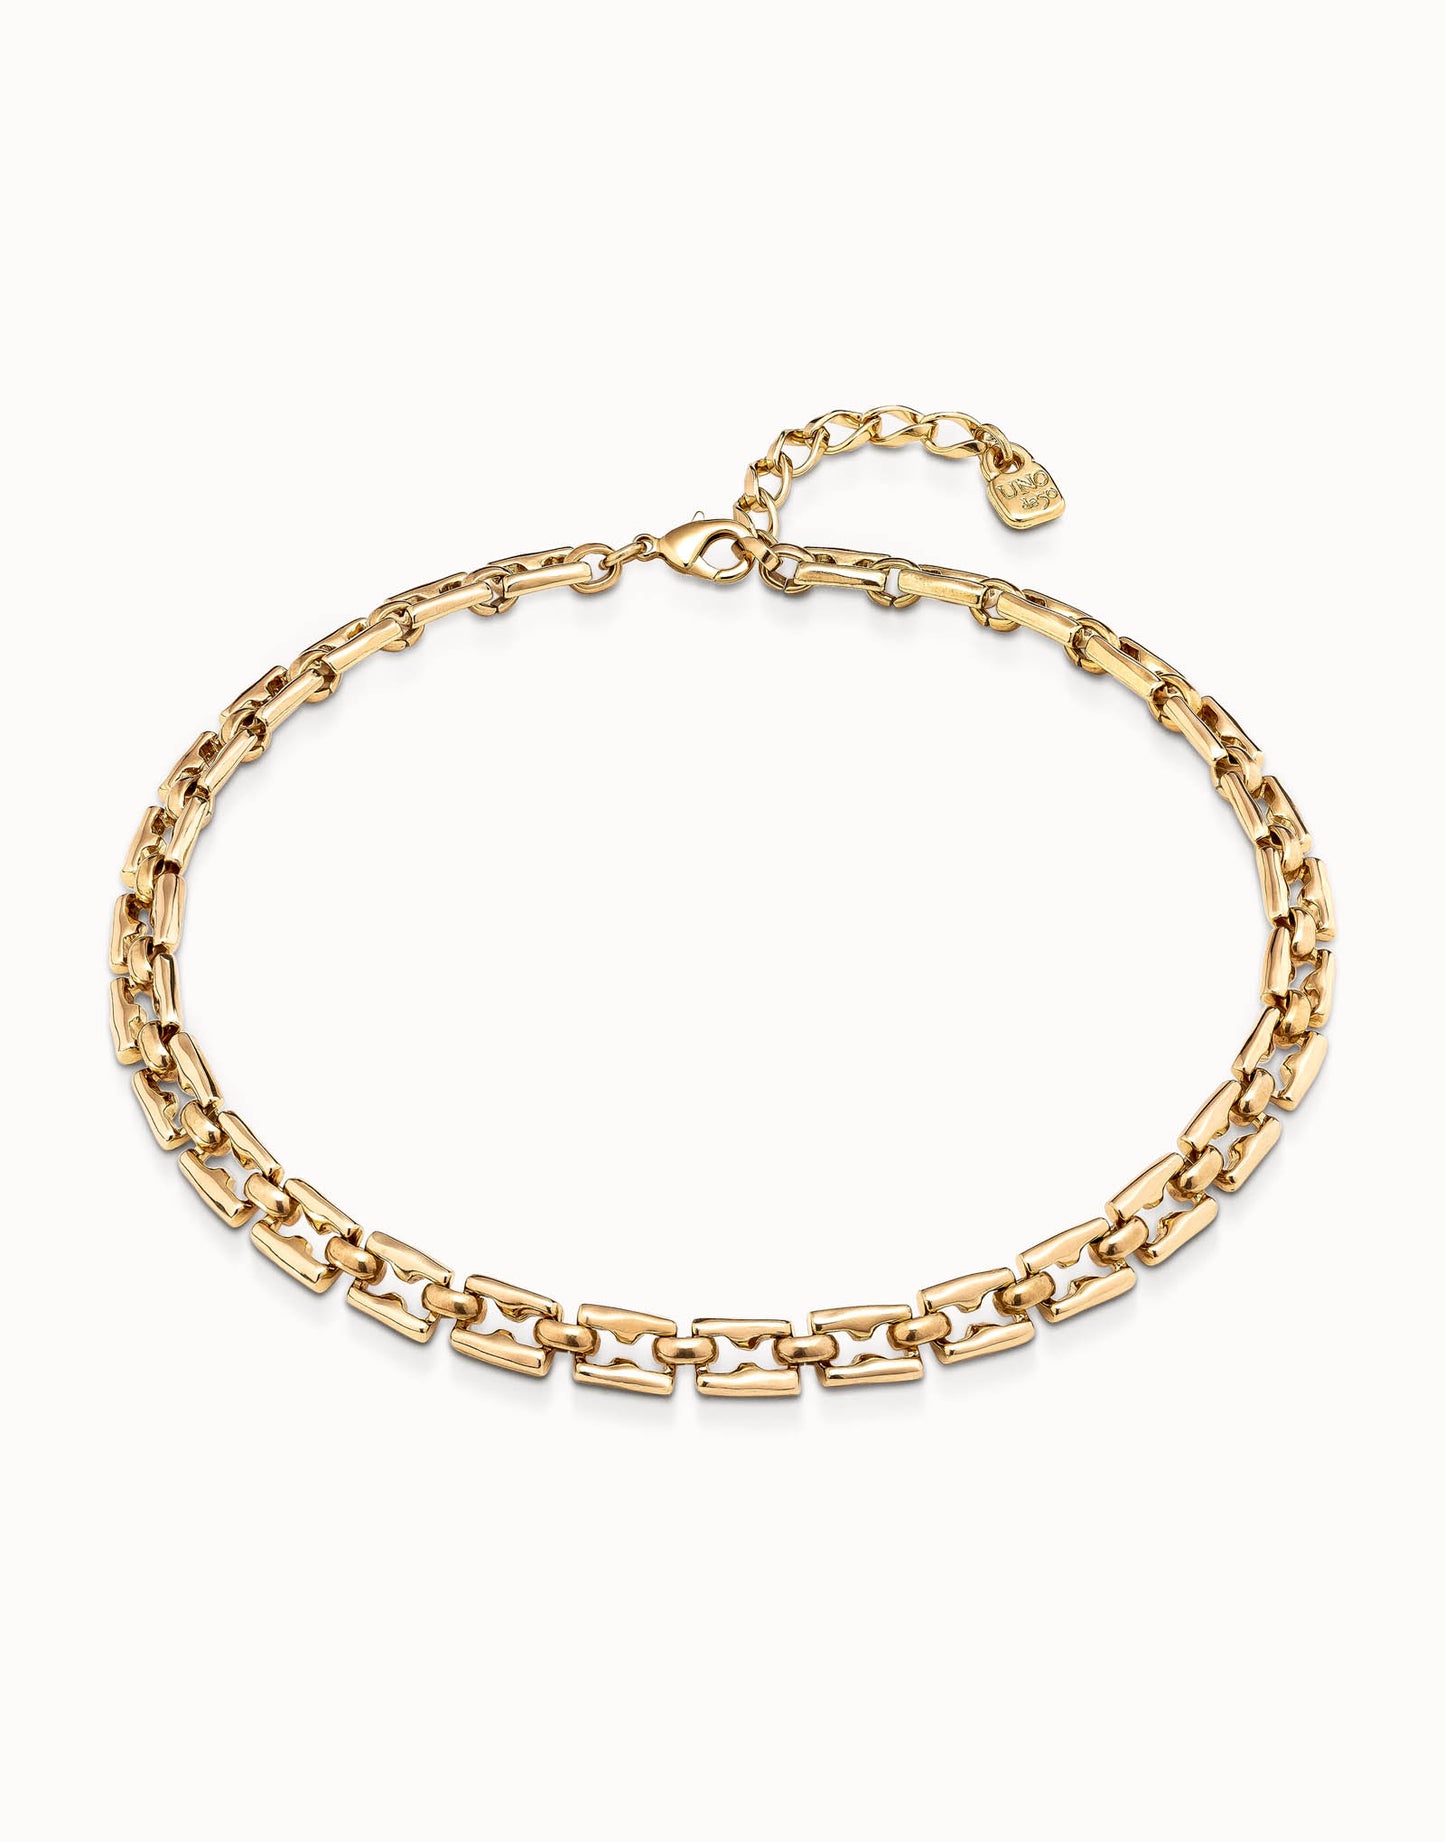 COLLAR YES SIR (Gold-Plated) | Uno de 50 | Luby 